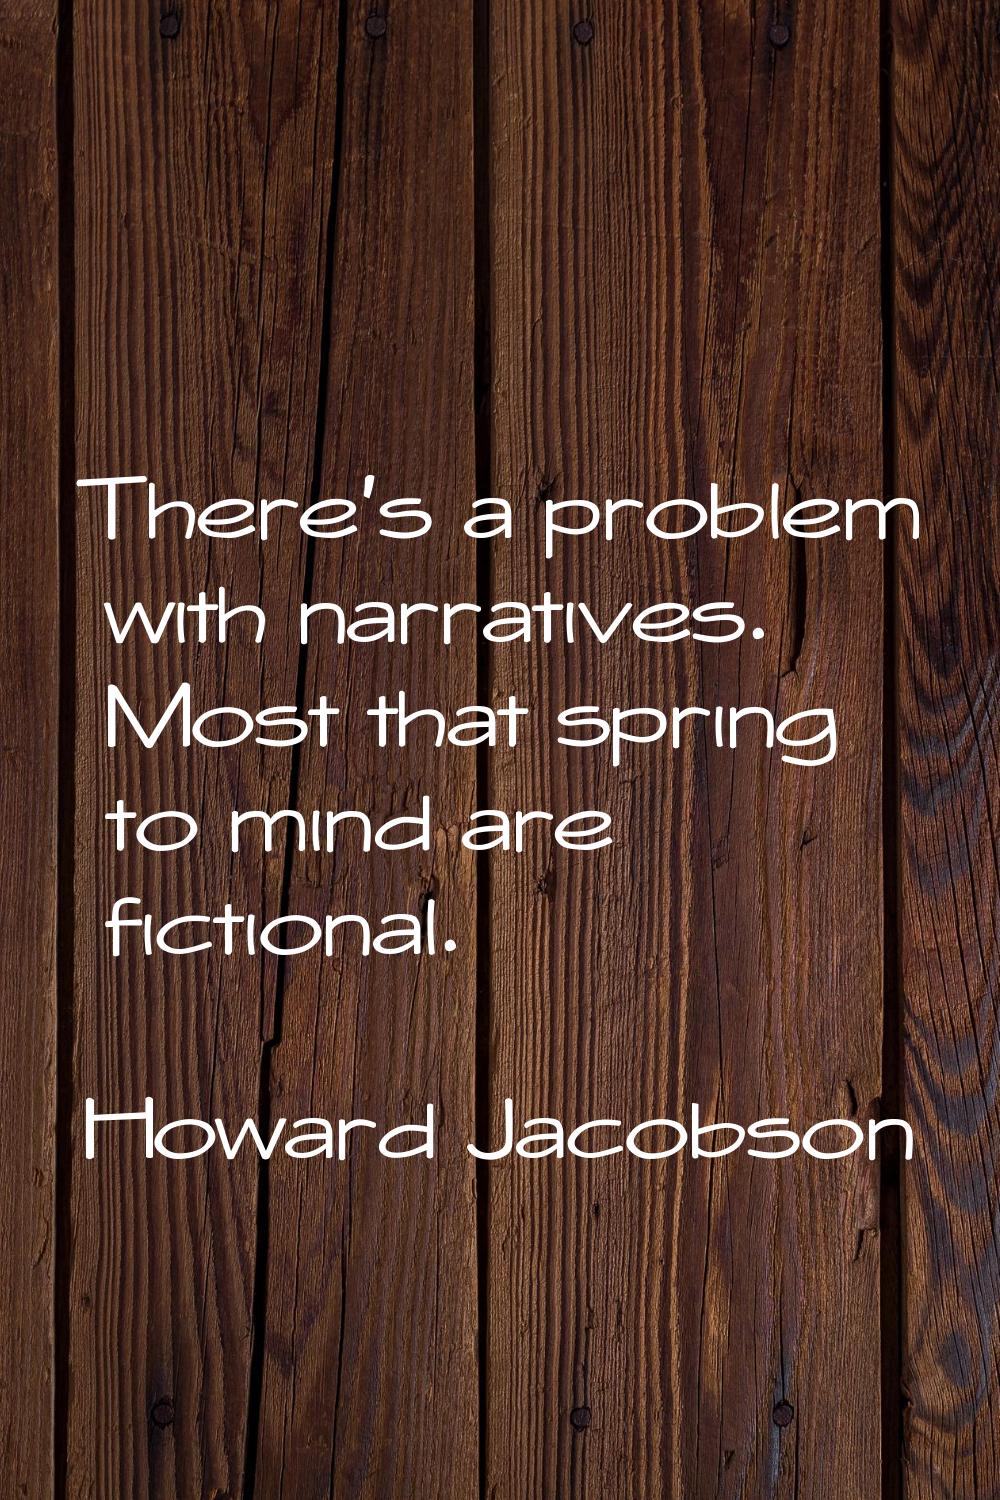 There's a problem with narratives. Most that spring to mind are fictional.